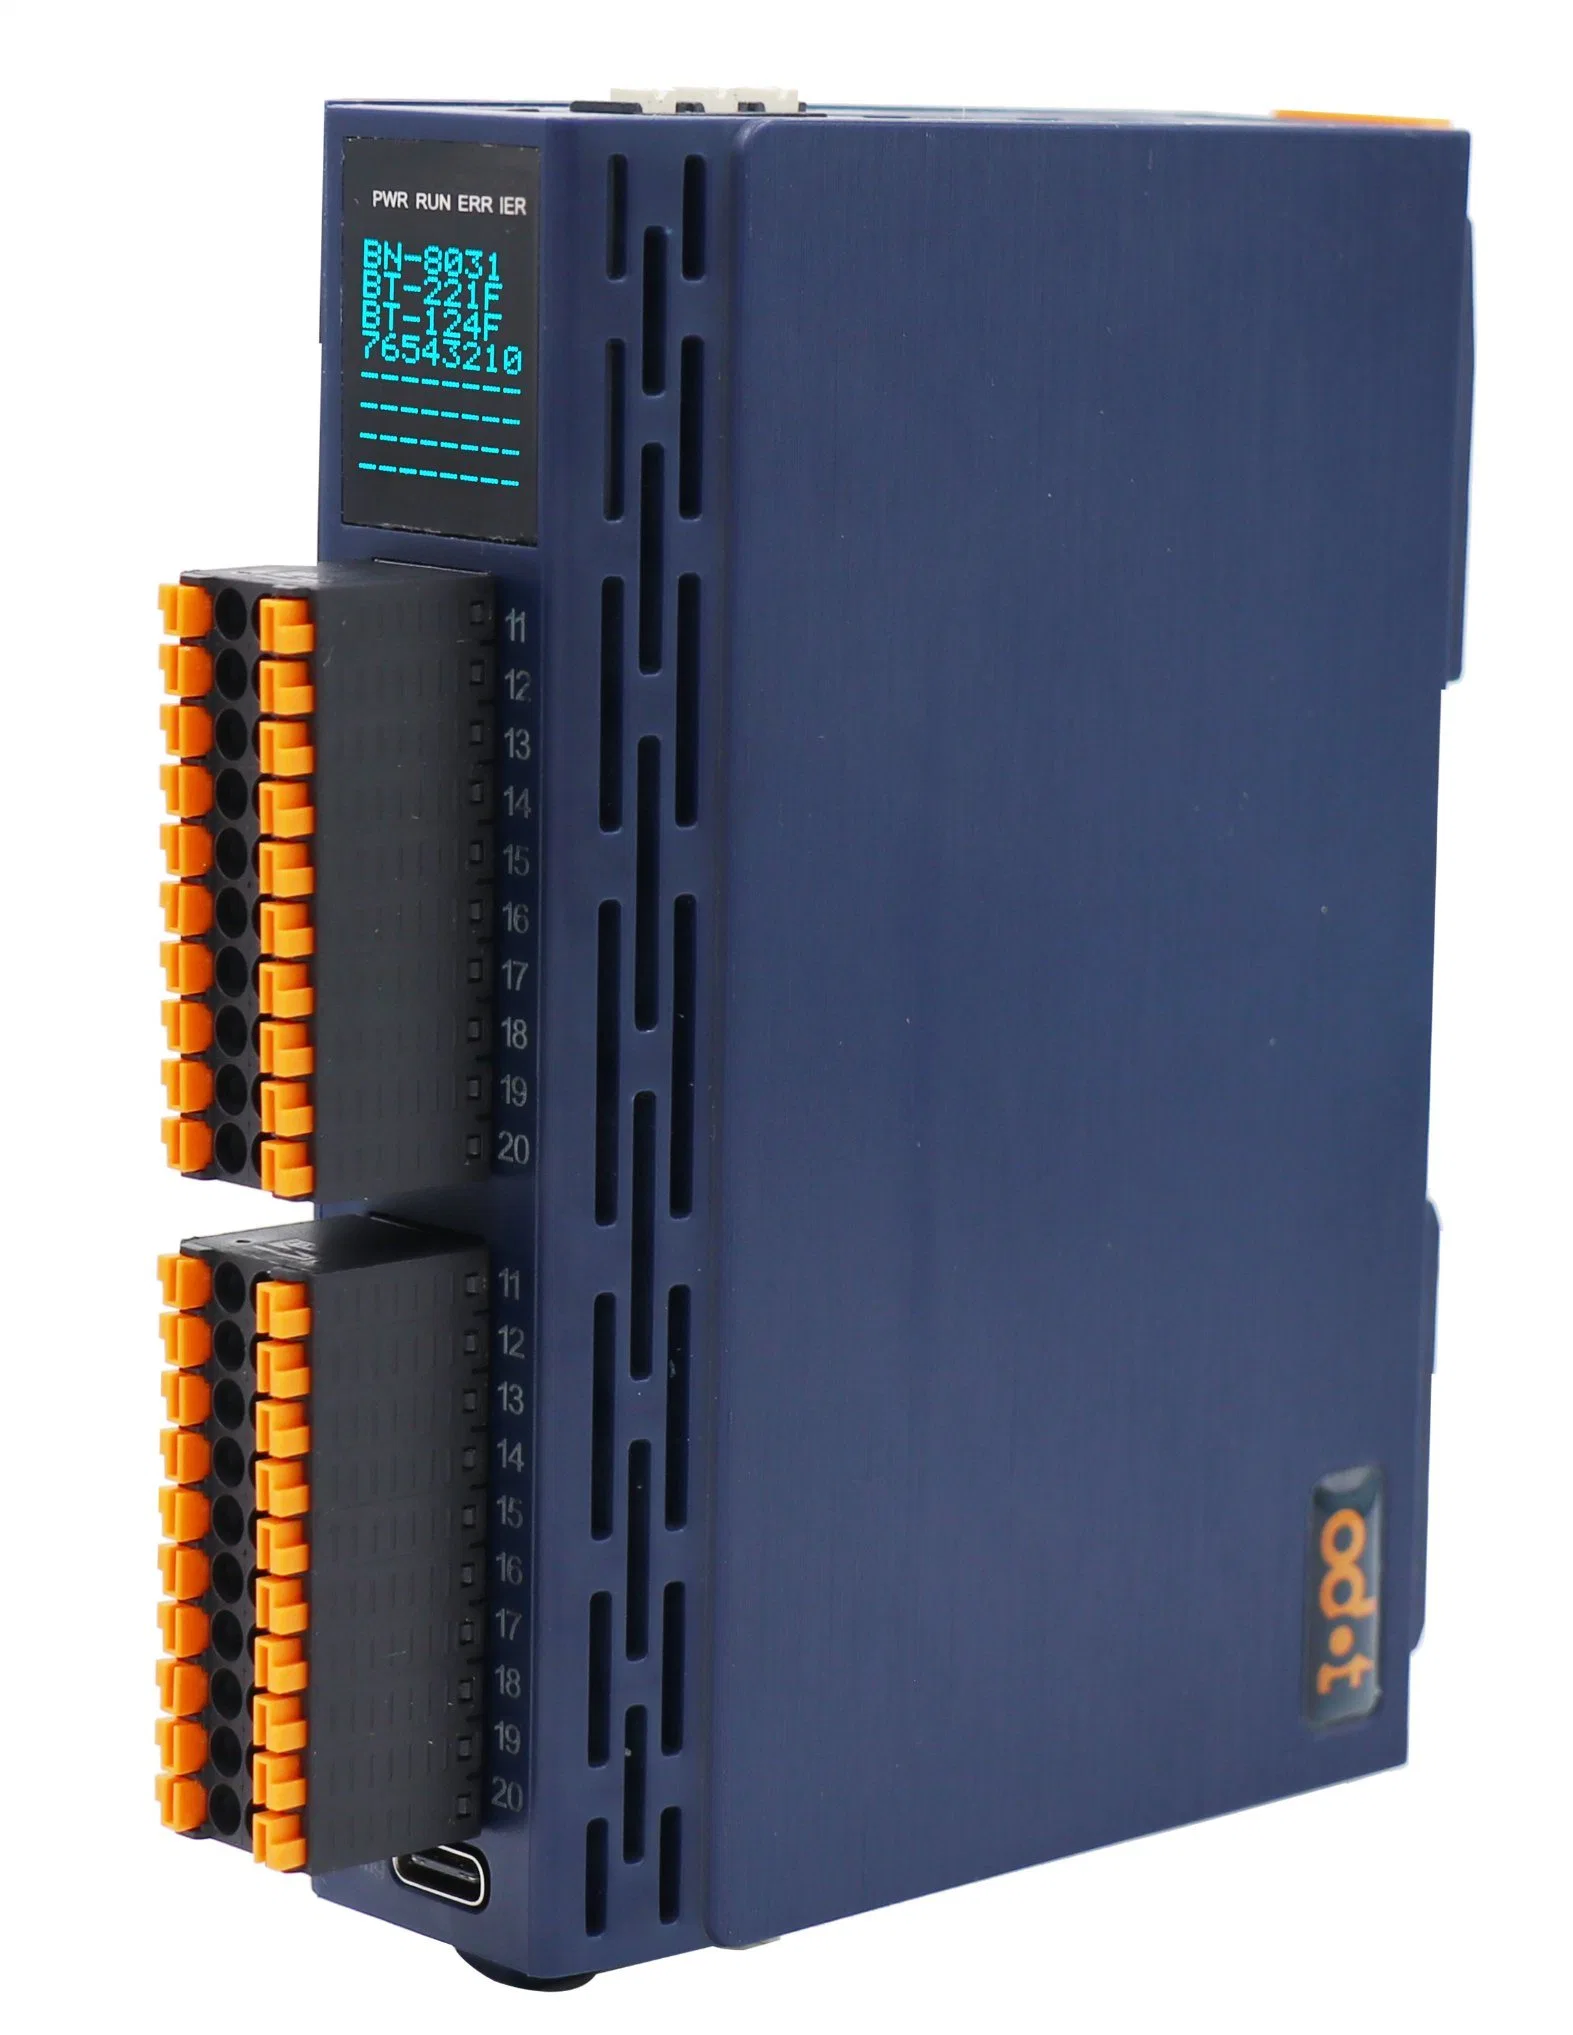 Integrated Io System for PLC Remote Control 16 Channel/ Digital Output/ 24VDC/ Sink, Output Low Level Valid